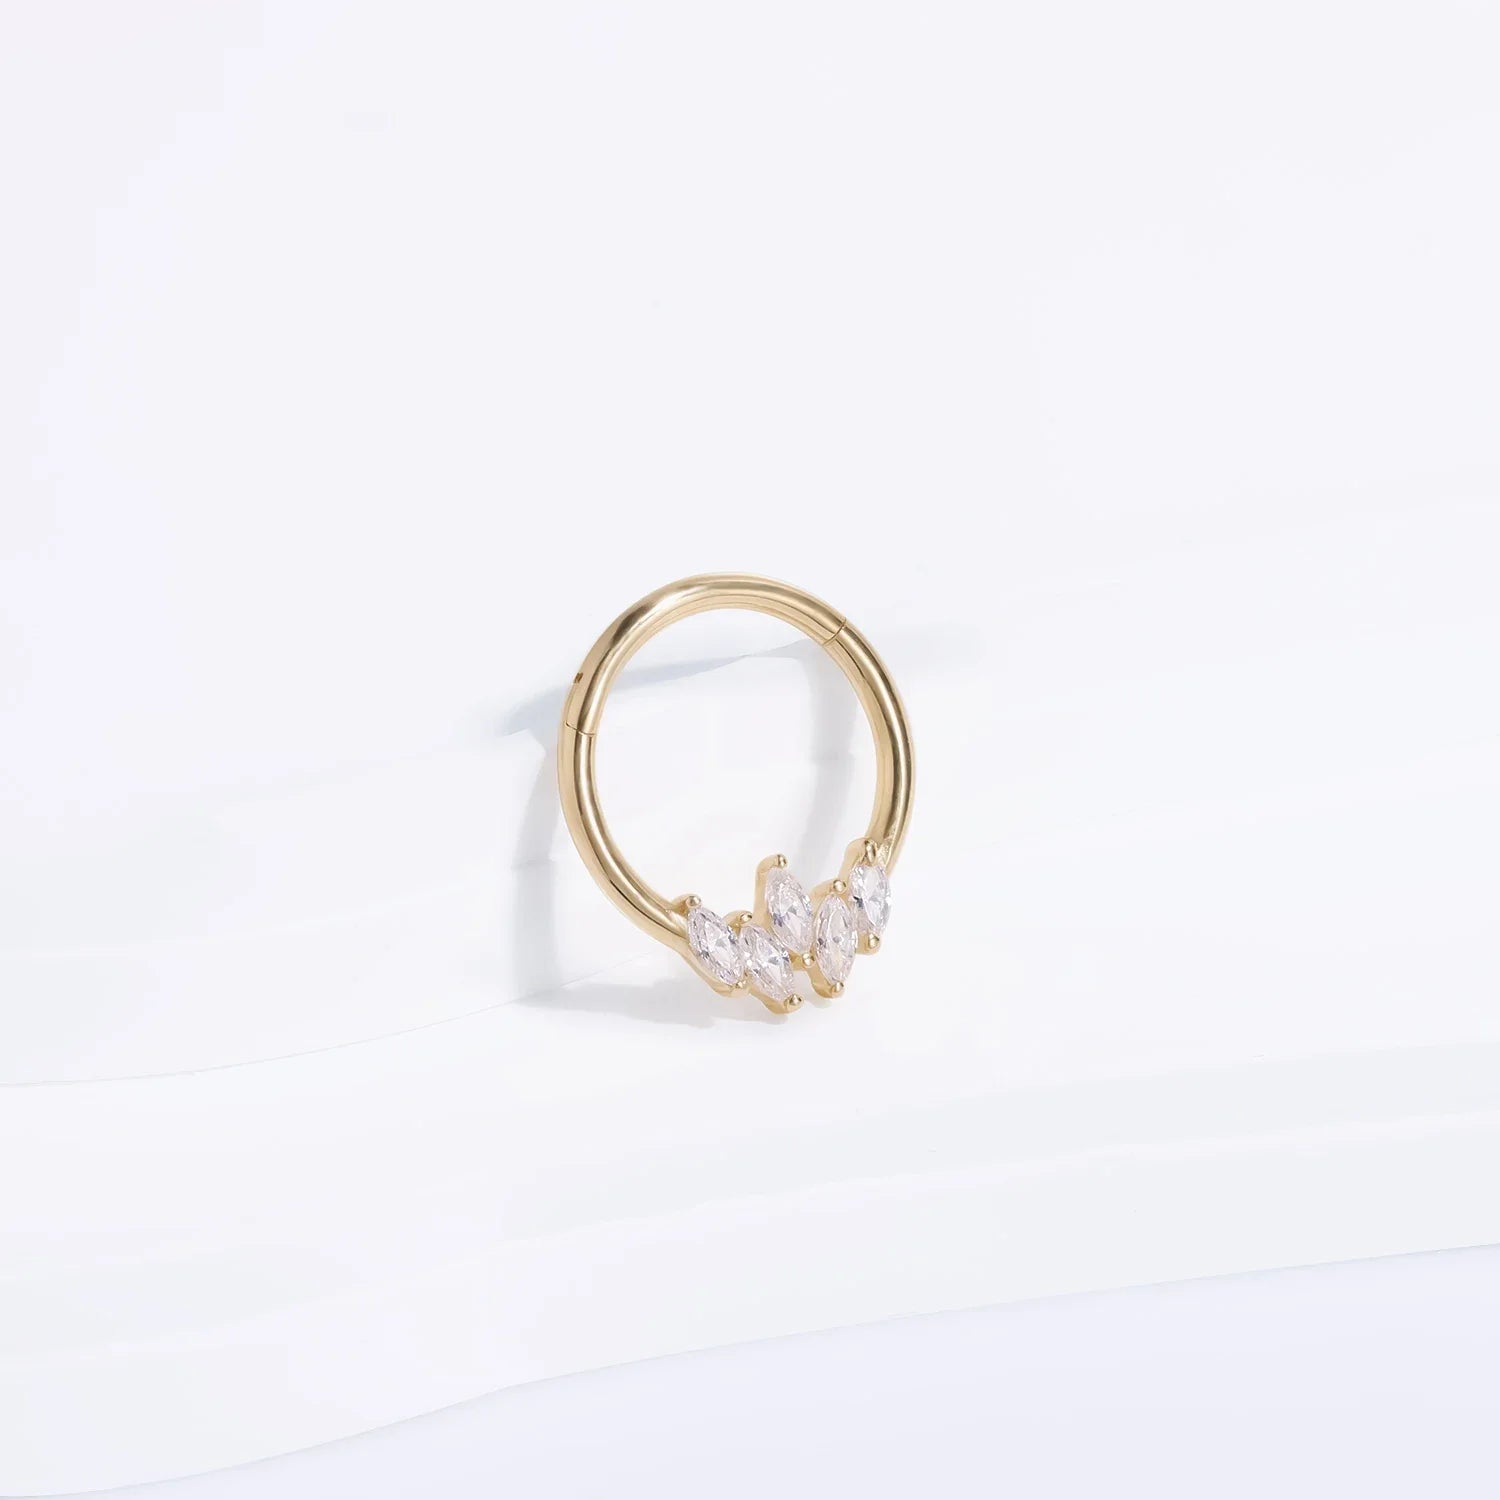 14k gold septum ring with clear CZ stones solid gold hinged segment clicker ring nose ring 16G Ashley Piercing Jewelry